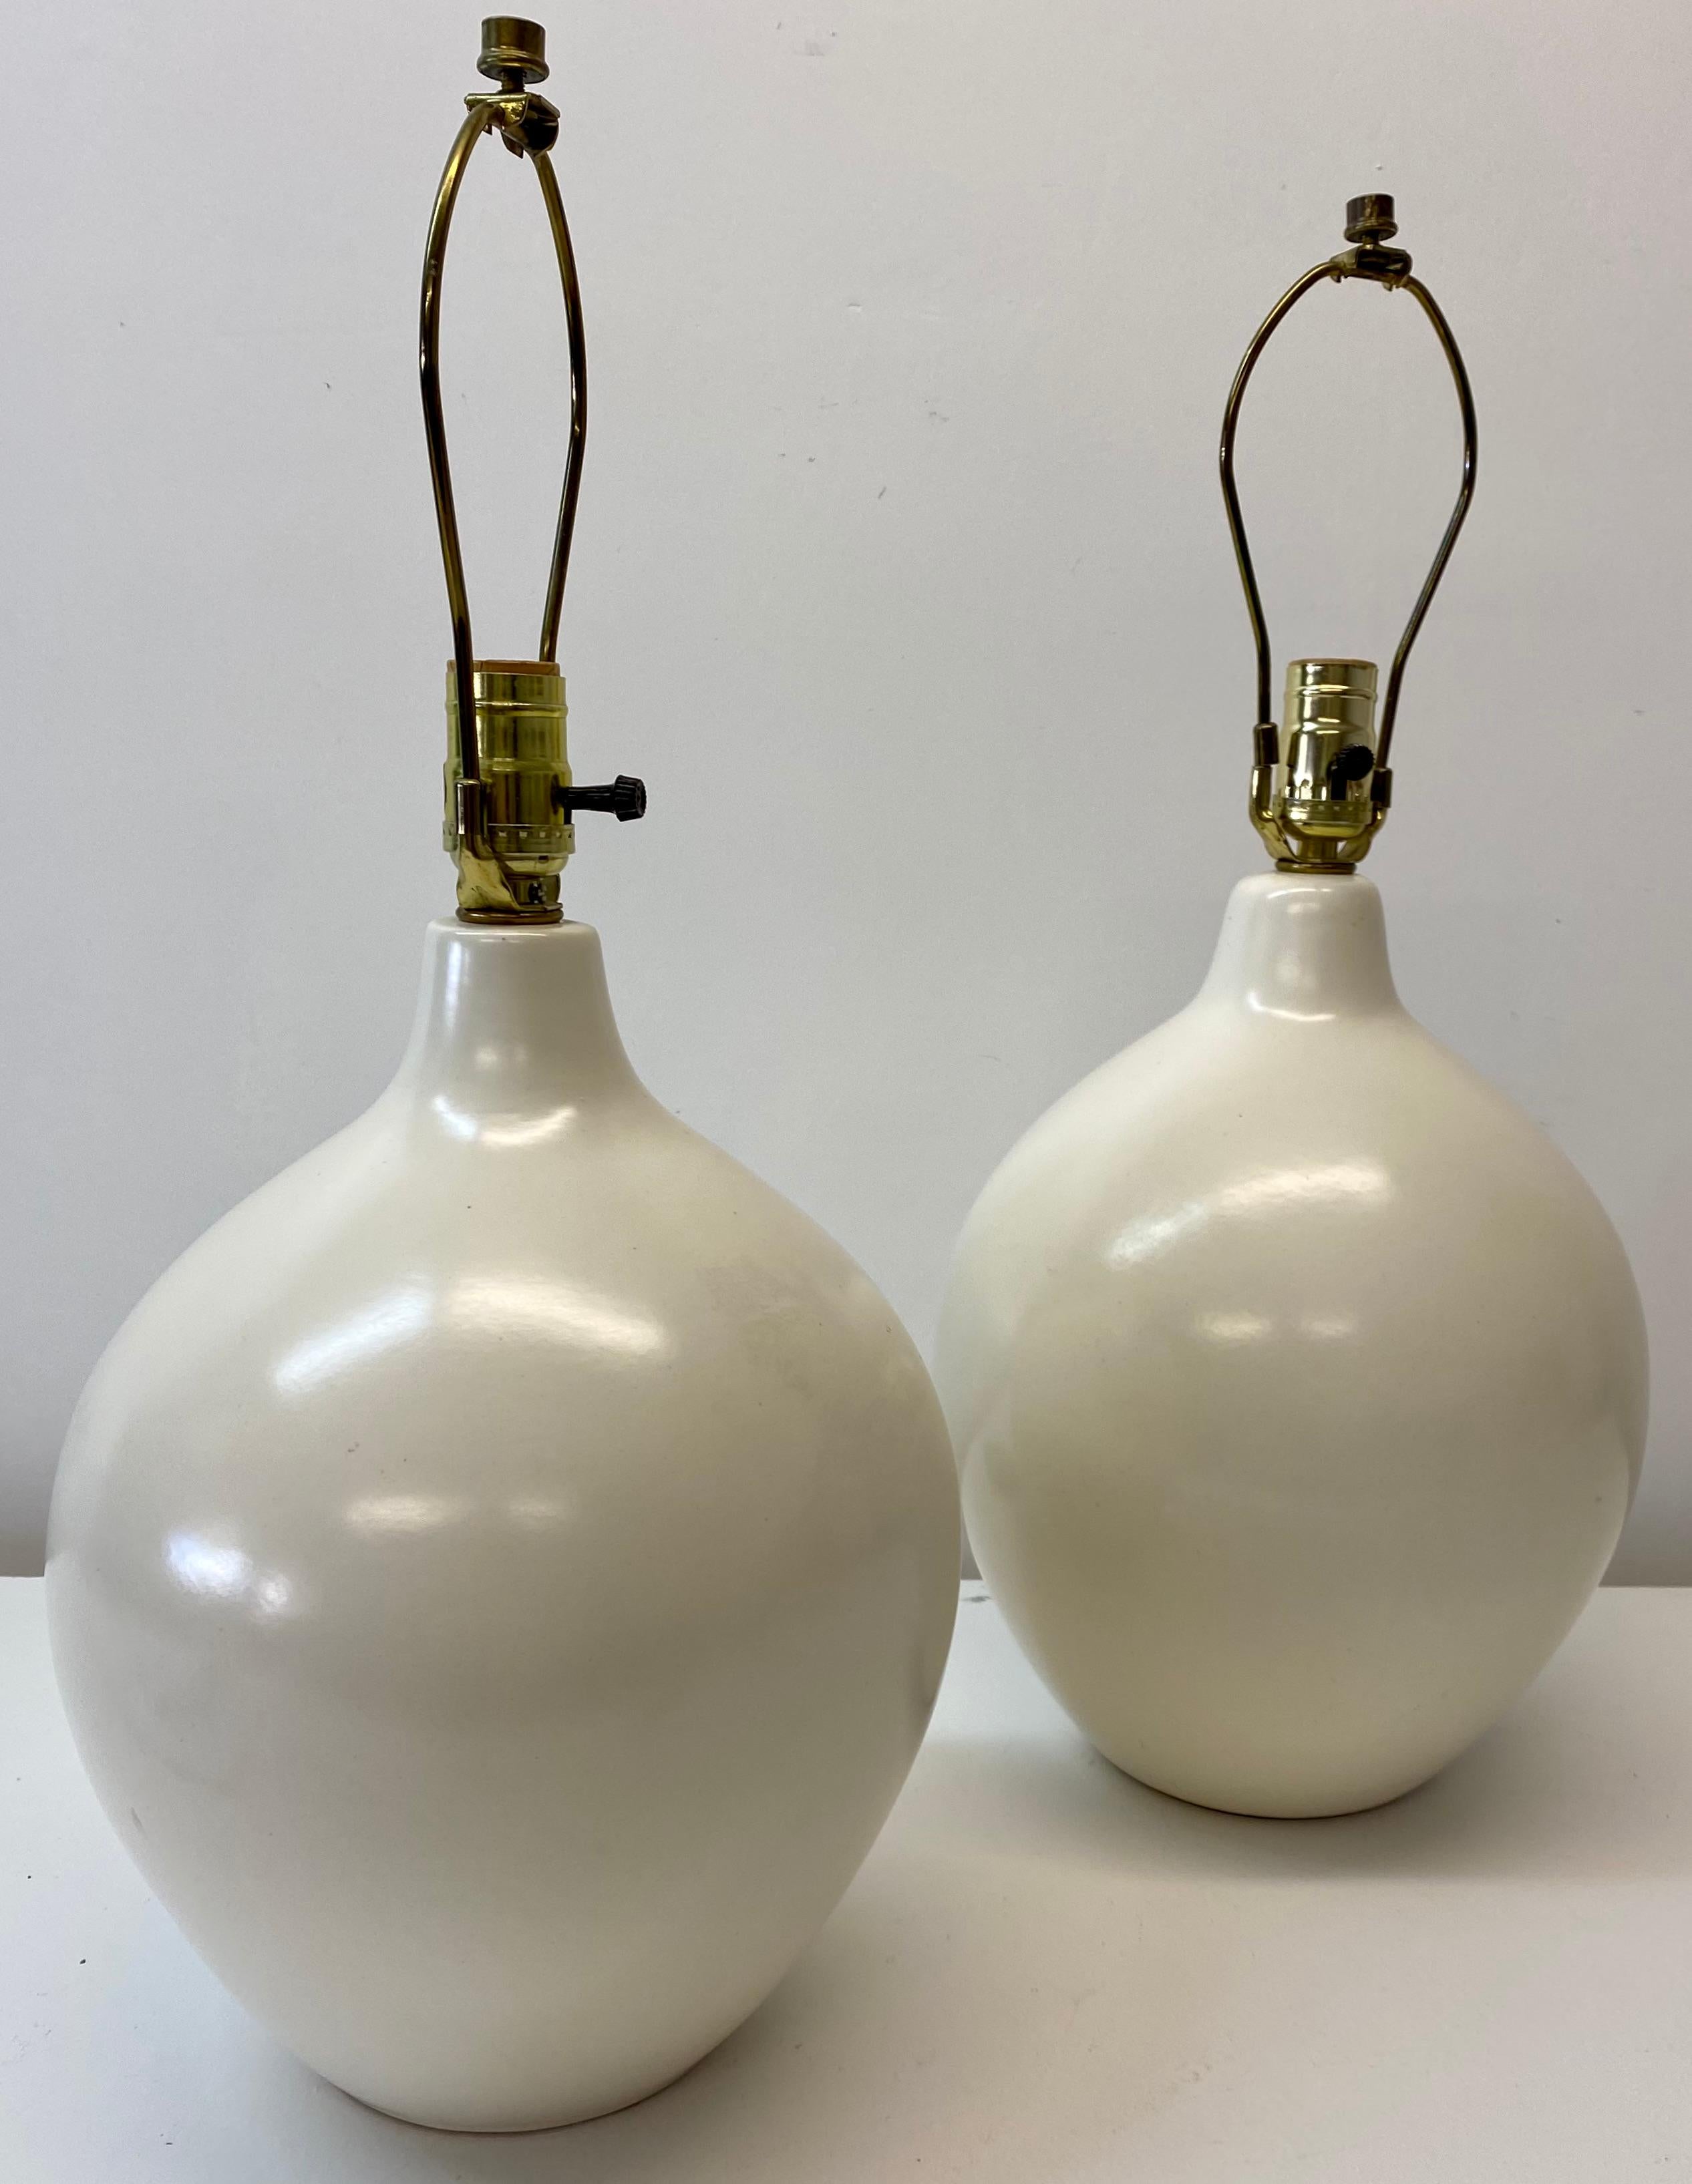 Pair of vintage white glazed ceramic table lamps by Lotte & Gunnar Bostlund 

Gorgeous mid 20th century lamps

10